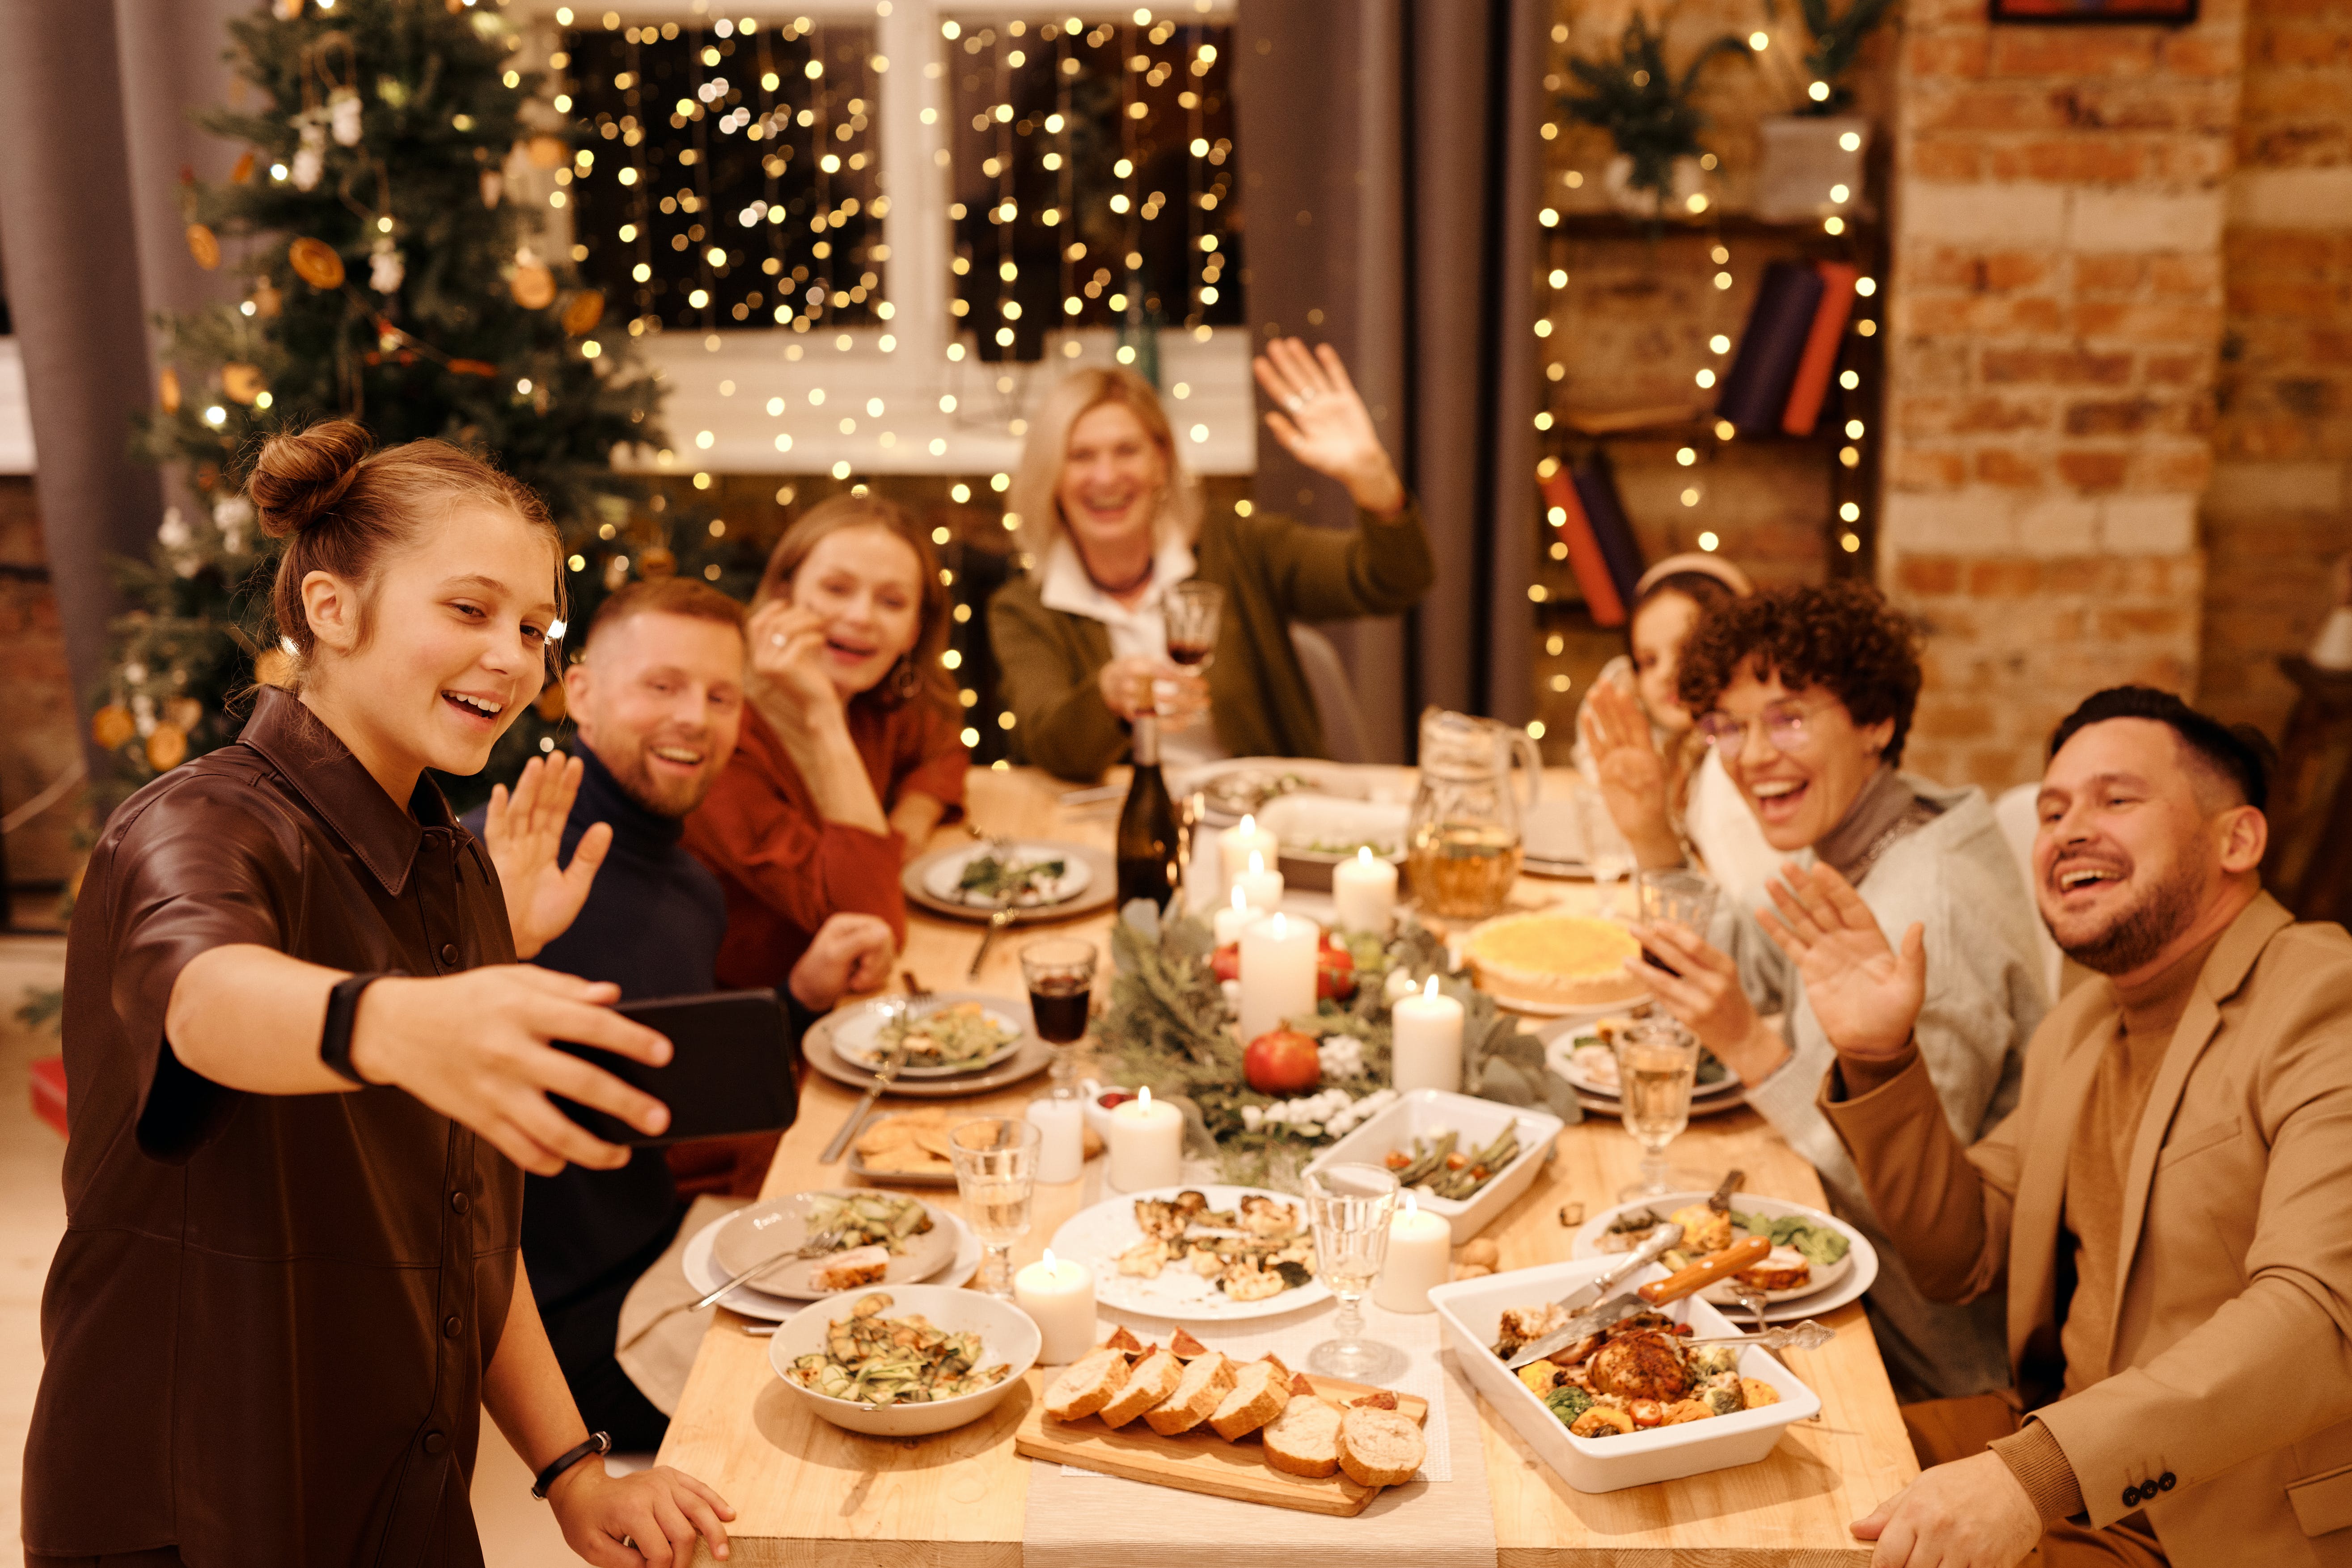 A Christmas celebration at home | Source: Pexels